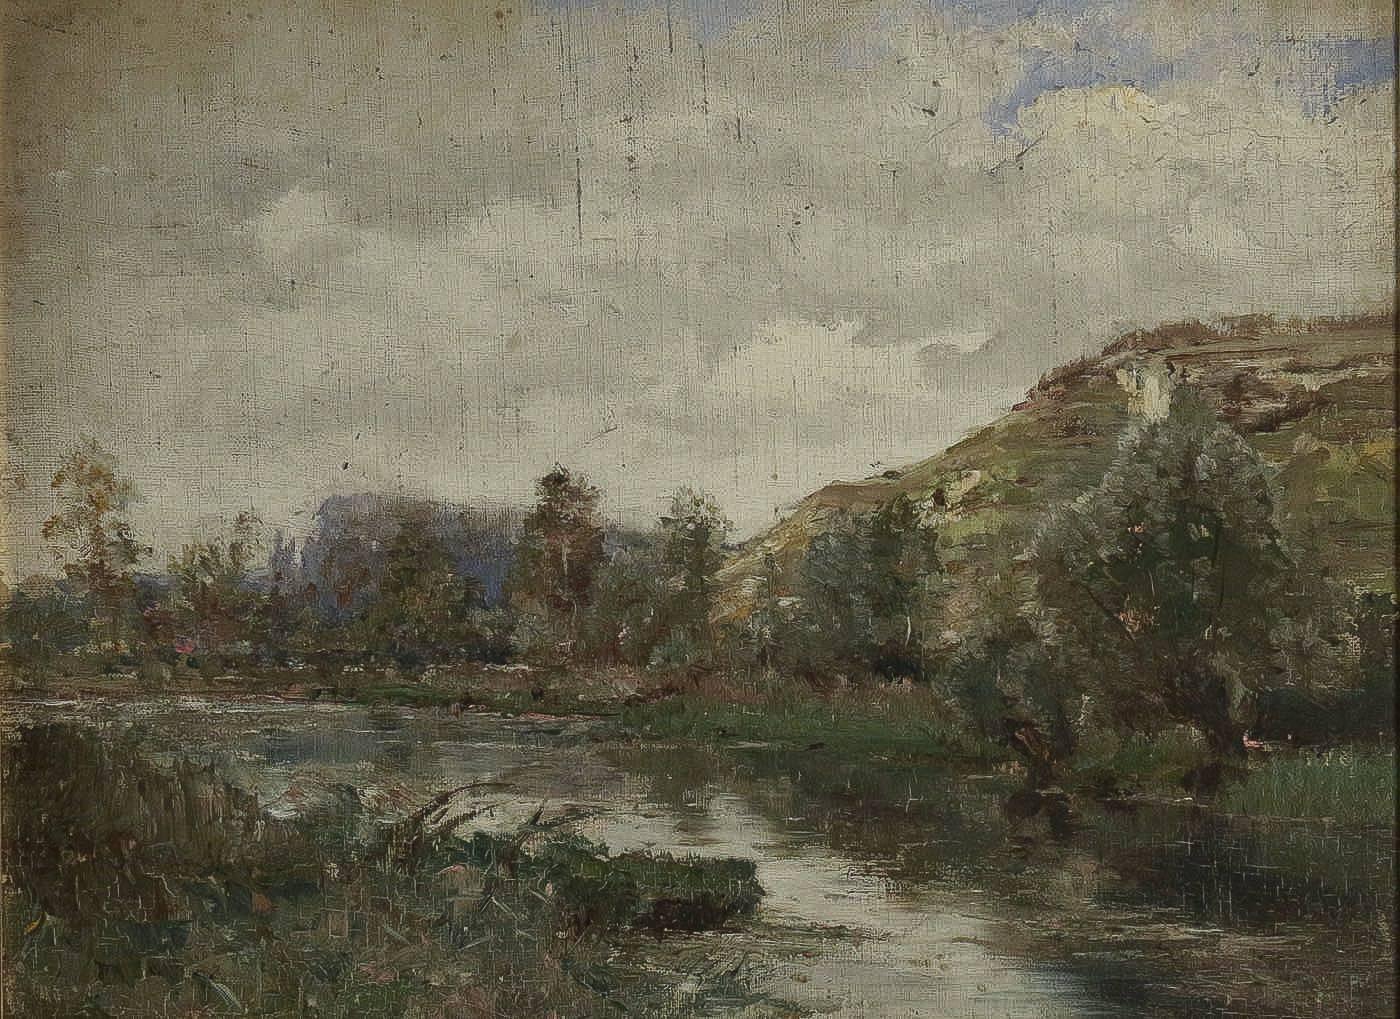 A lovely Barbizon School, oil on cardboard depicting a river landscape, in a ornamental giltwood frame. 

Measurments unframed W 20.07 inches, H 14.96 inches.
Measurements with frame W 25.59 inches, H 20.47 inches.

In fine condition.
 